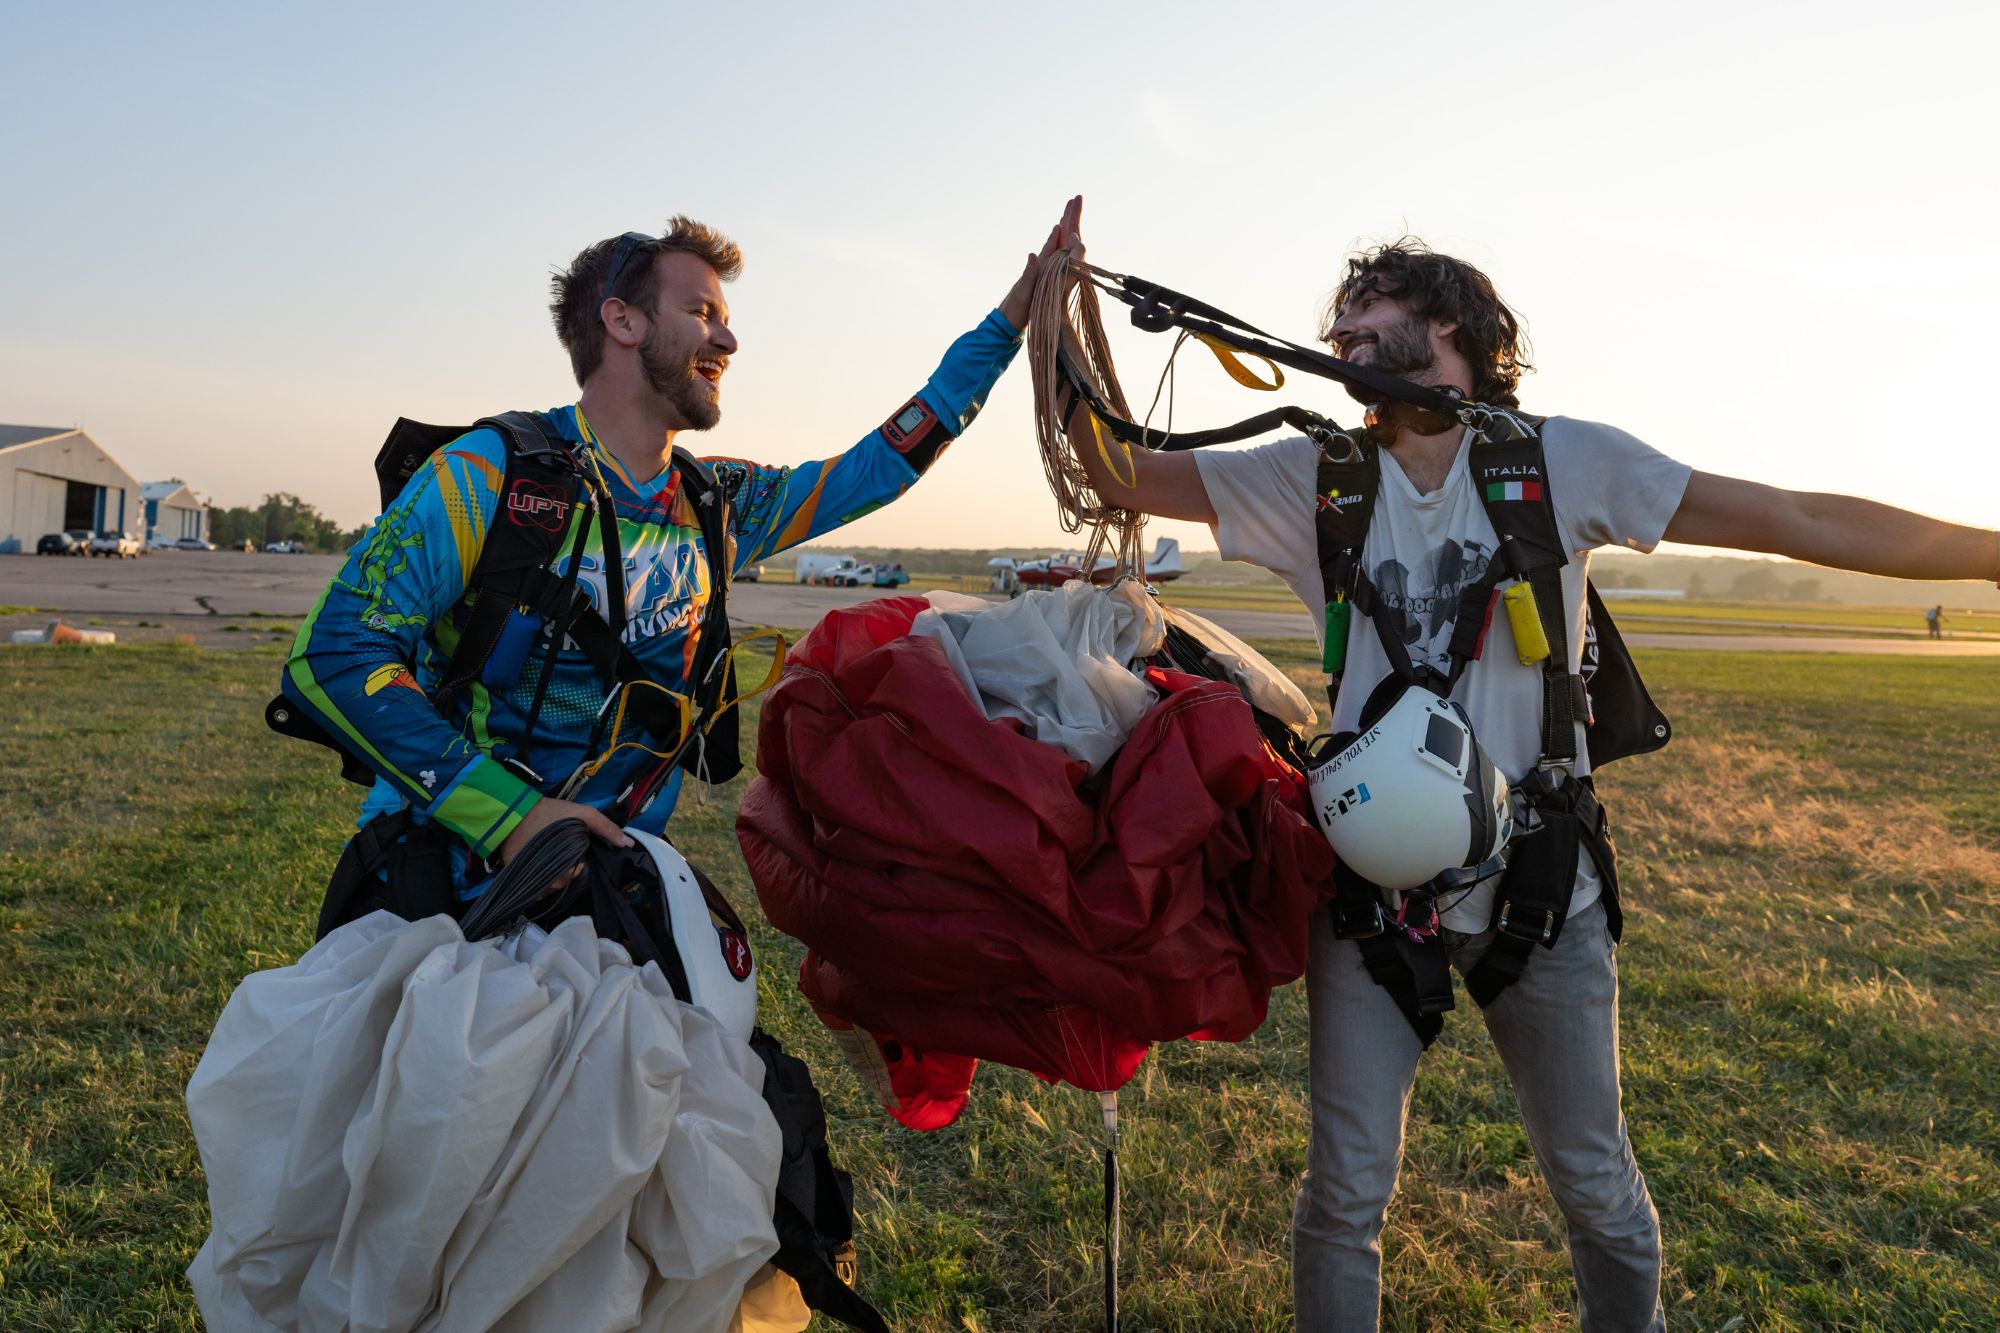 Two licensed skydivers holding their canopies high five jubilantly on the ground after landing